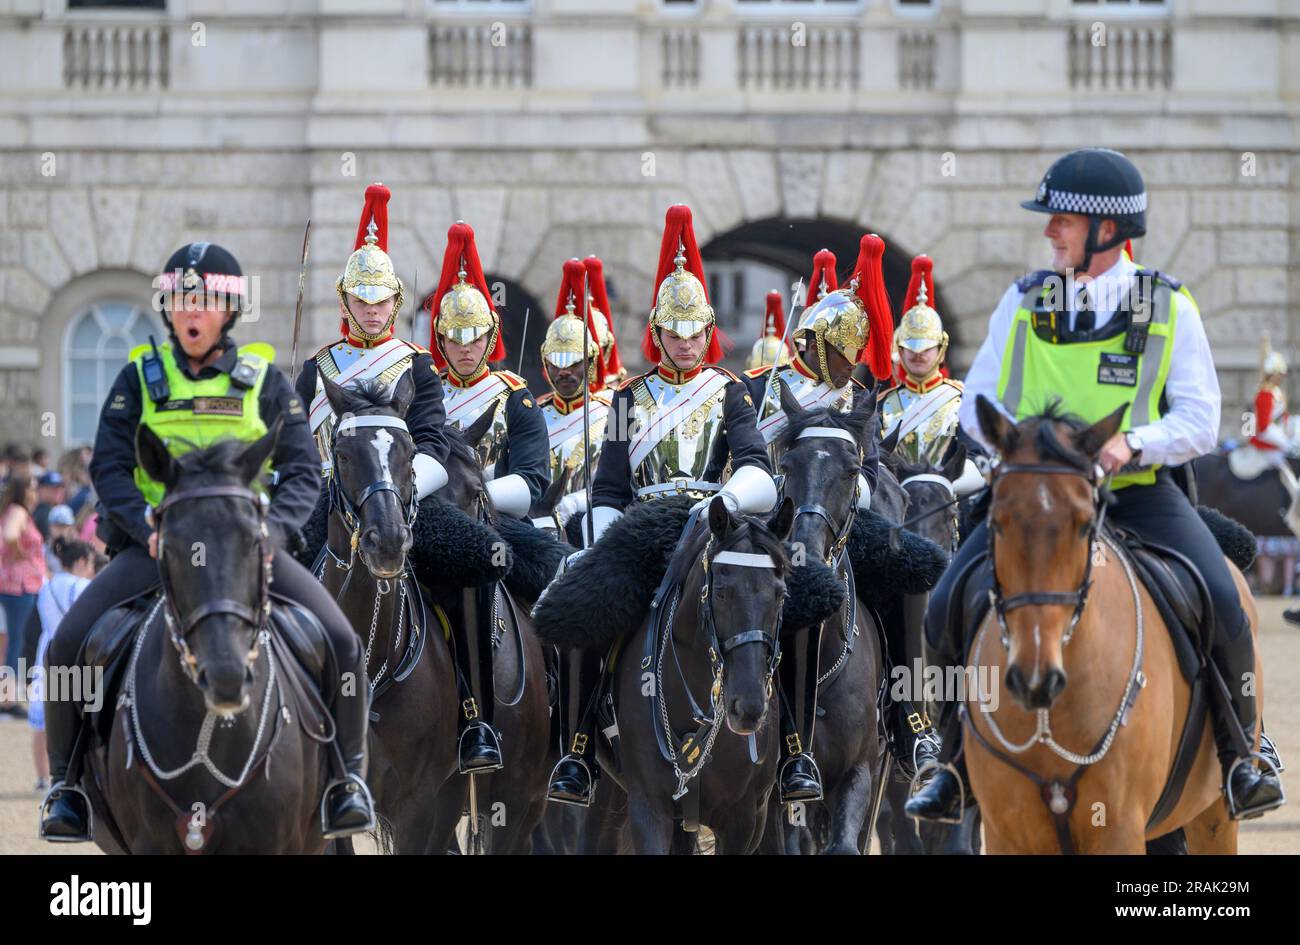 London, UK. Member of the Household Cavalry (Blues and Royals) escorted by mounted police from Horse Guards Parade after the daily Changing of the .. Stock Photo